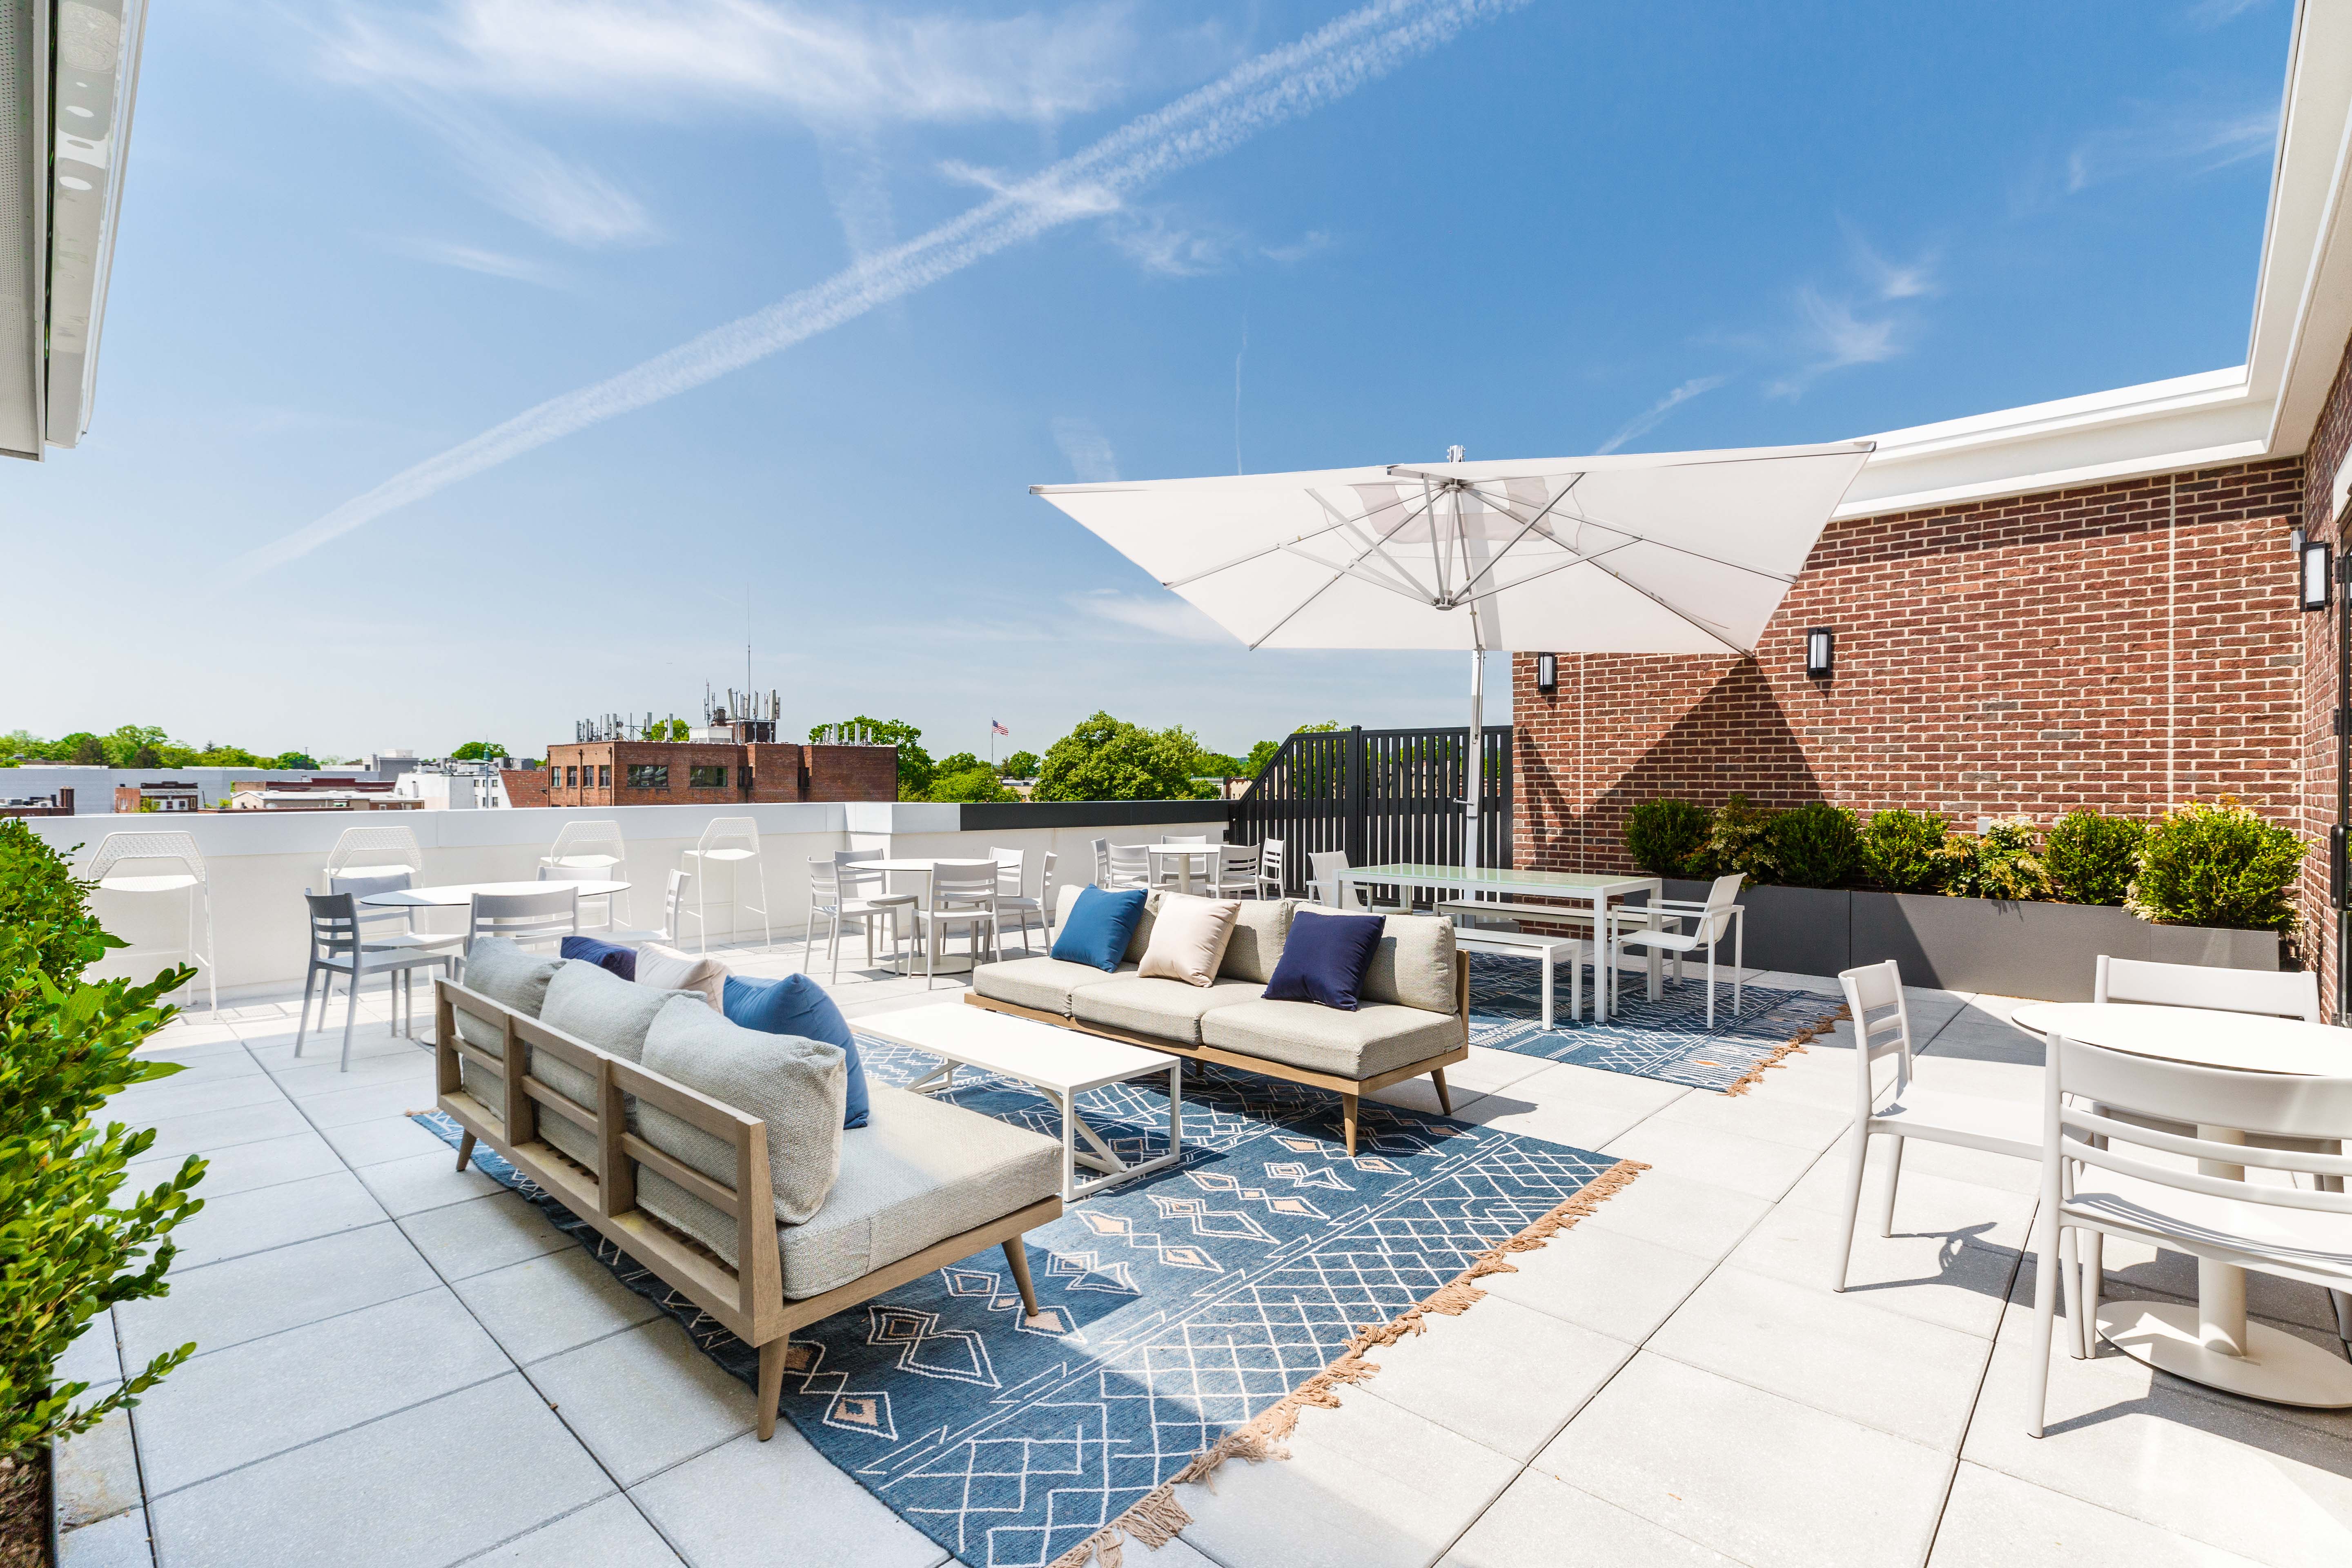 Picture for home-residences slide: Rooftop Lounge